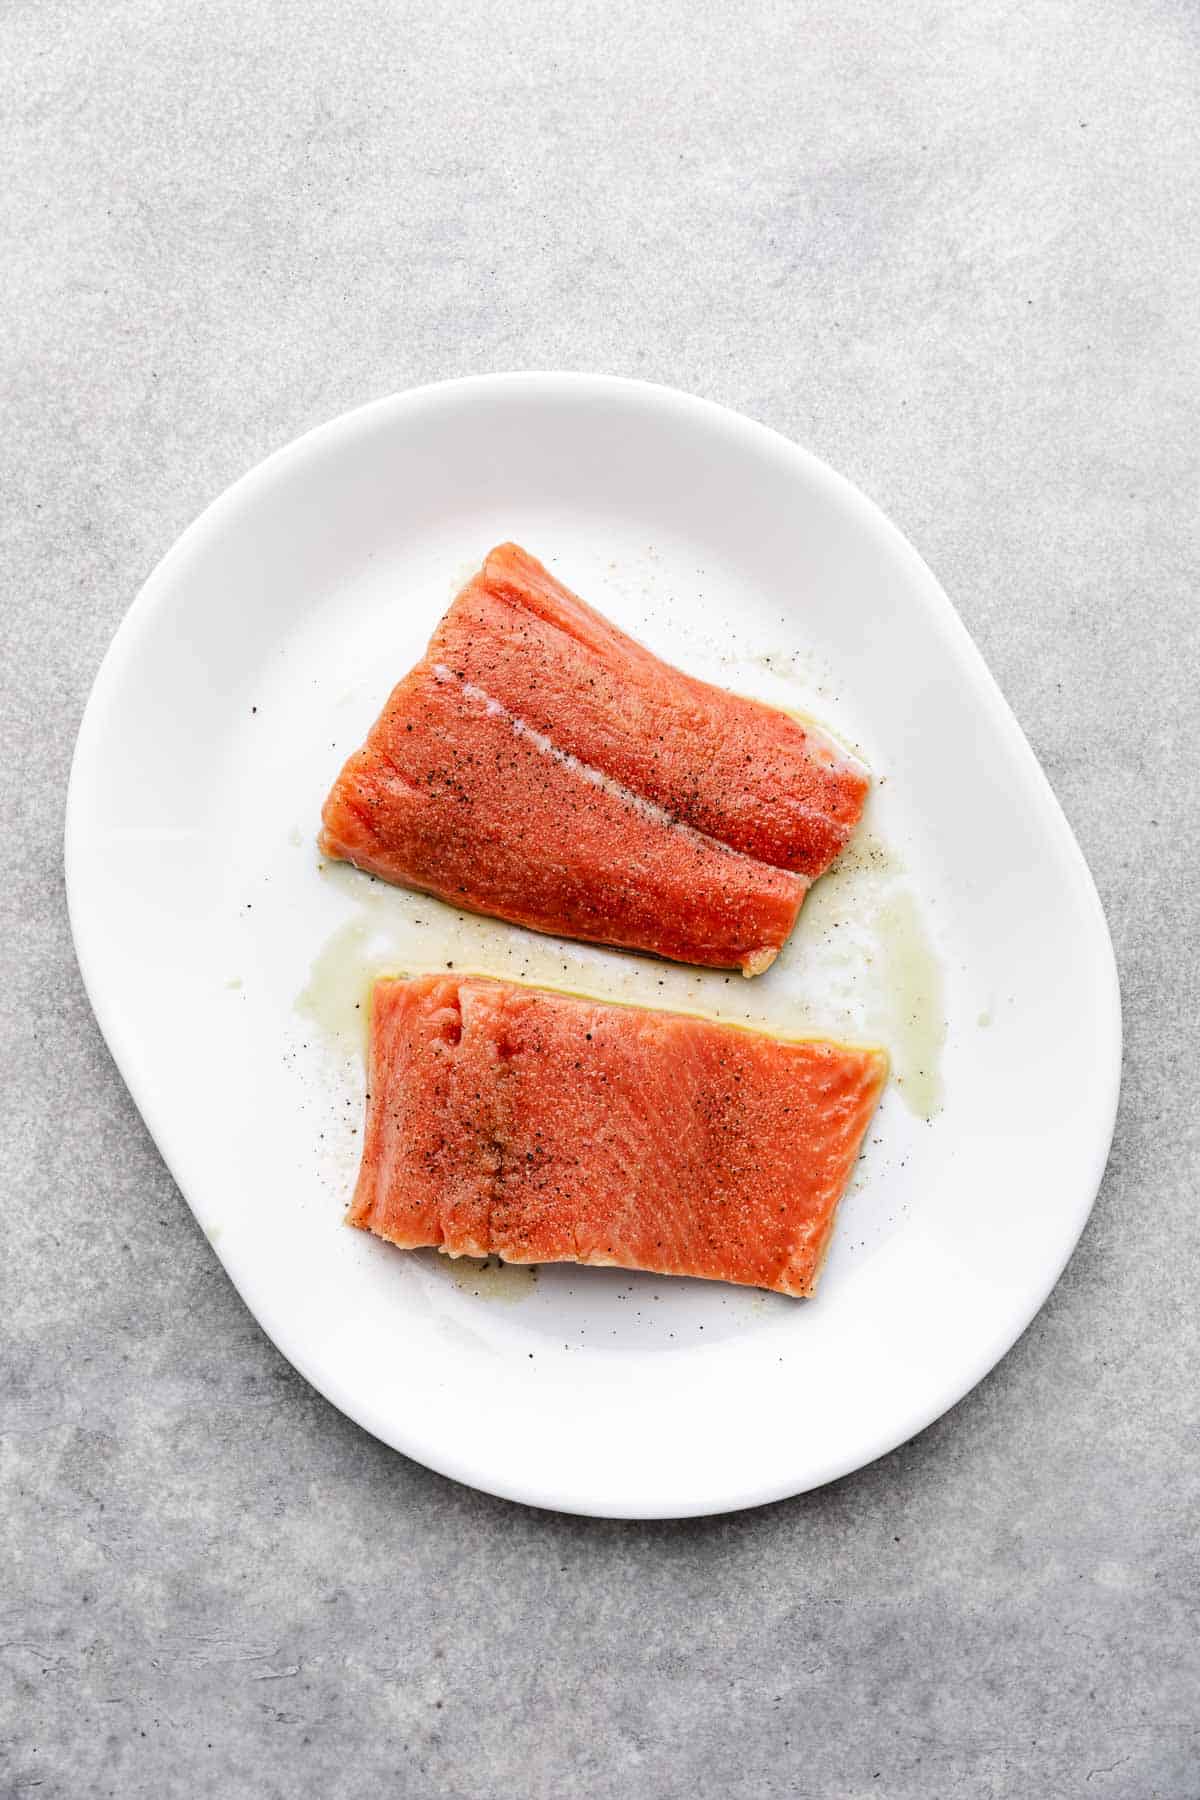 Salt, pepper, and olive oil sprinkled over uncooked salmon.